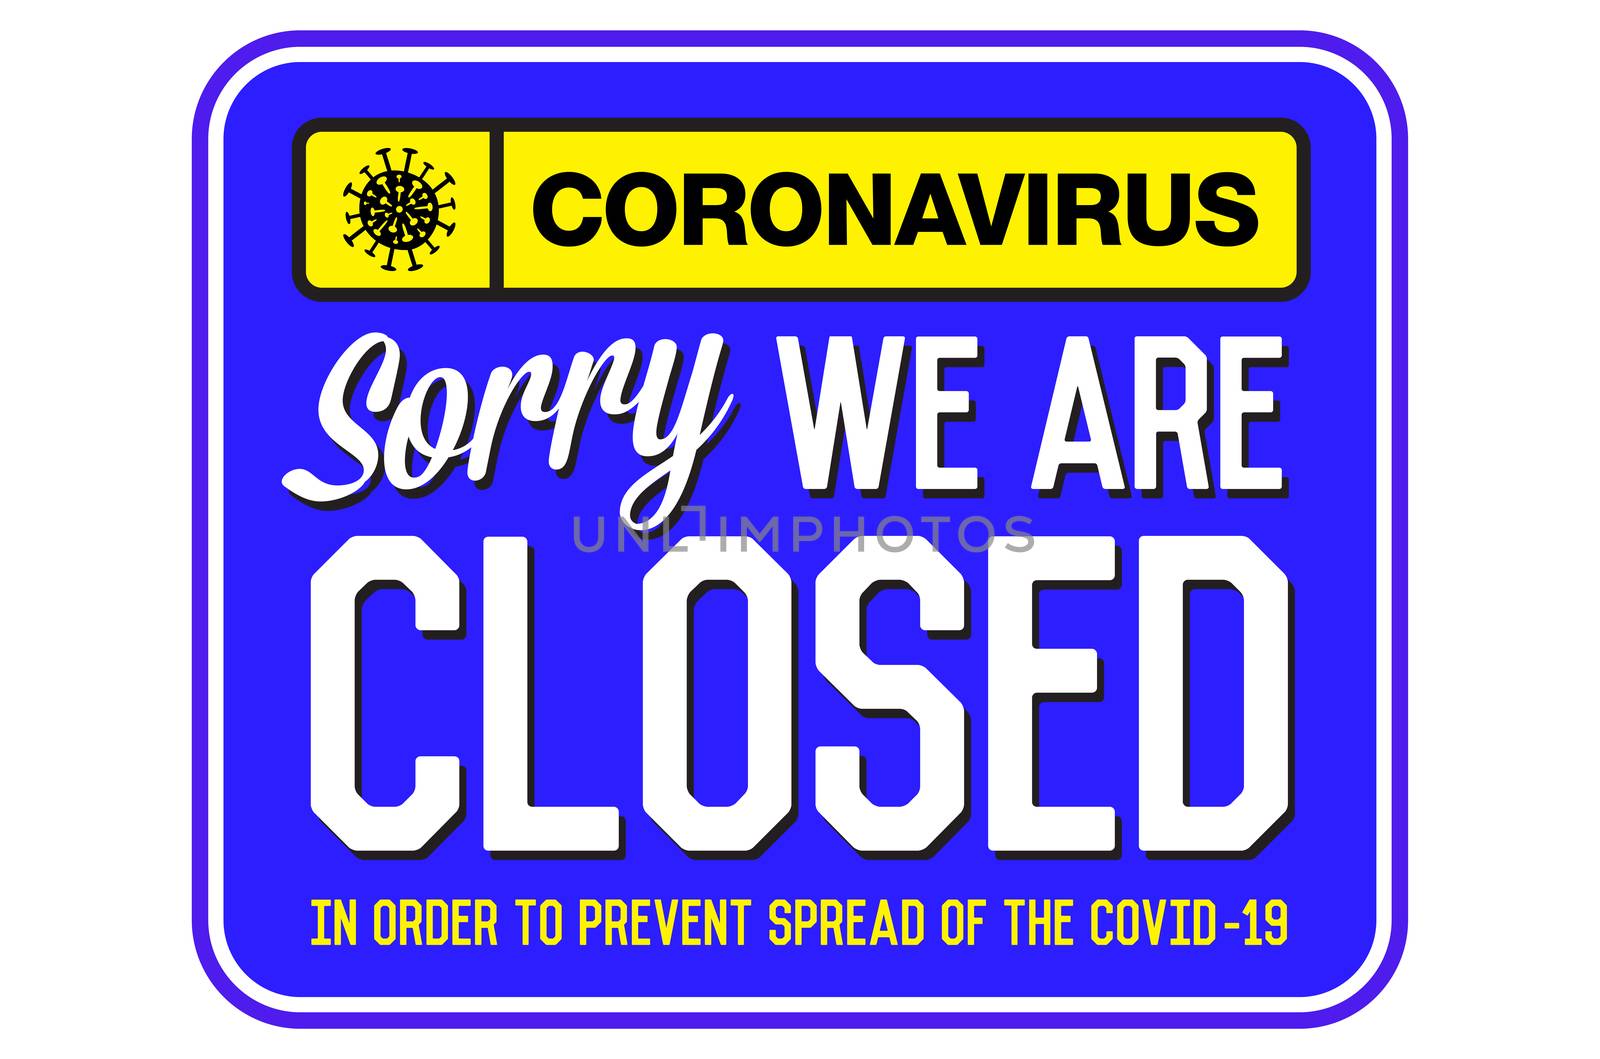 Information warning sign about quarantine measures in public places. Sorry We Are Closed. Coronavirus News.  Restriction and caution COVID-19. Vector. Web, print, banner, flyer.